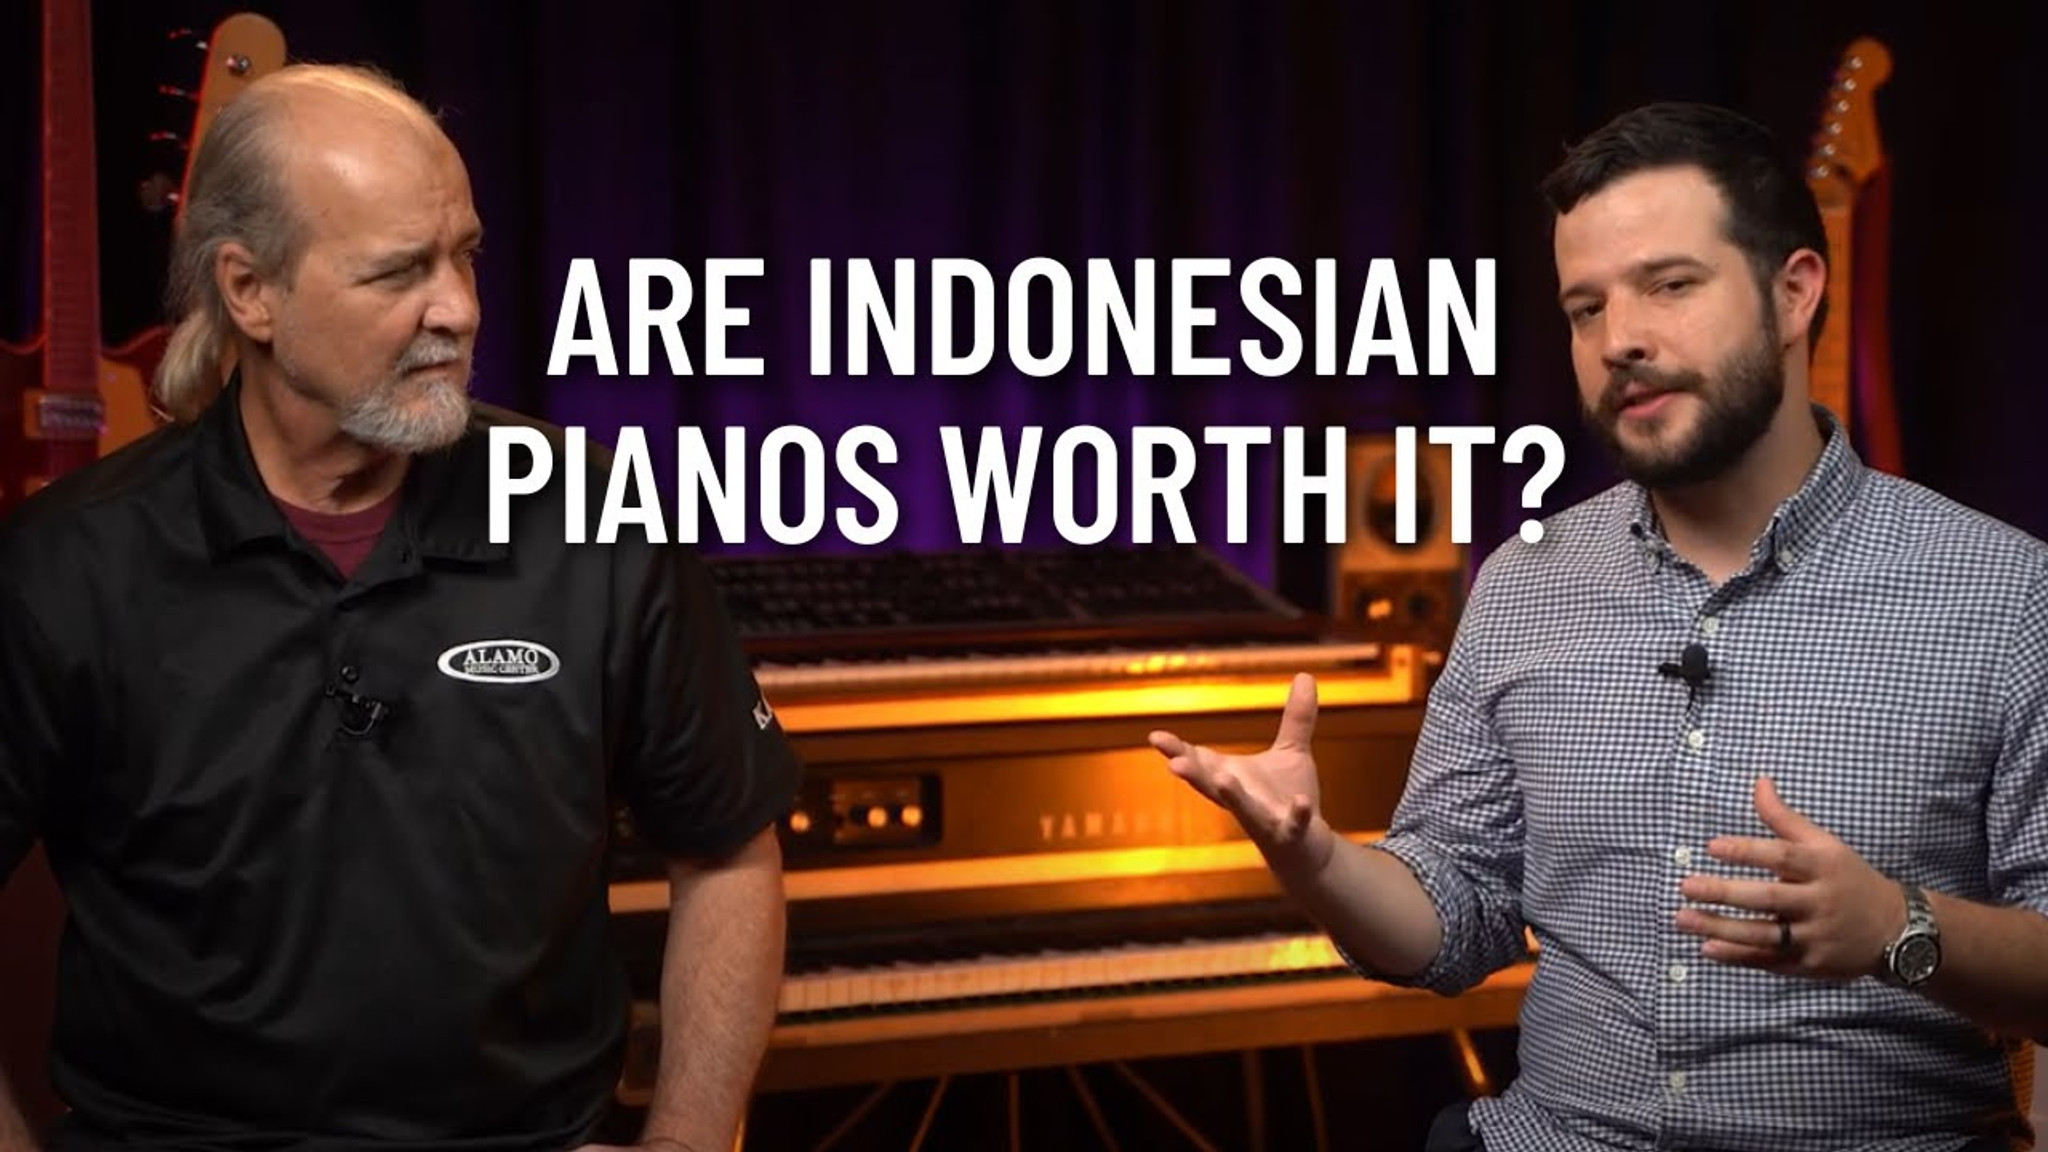 Everyone's Asking...Are Indonesian Pianos Worth It?